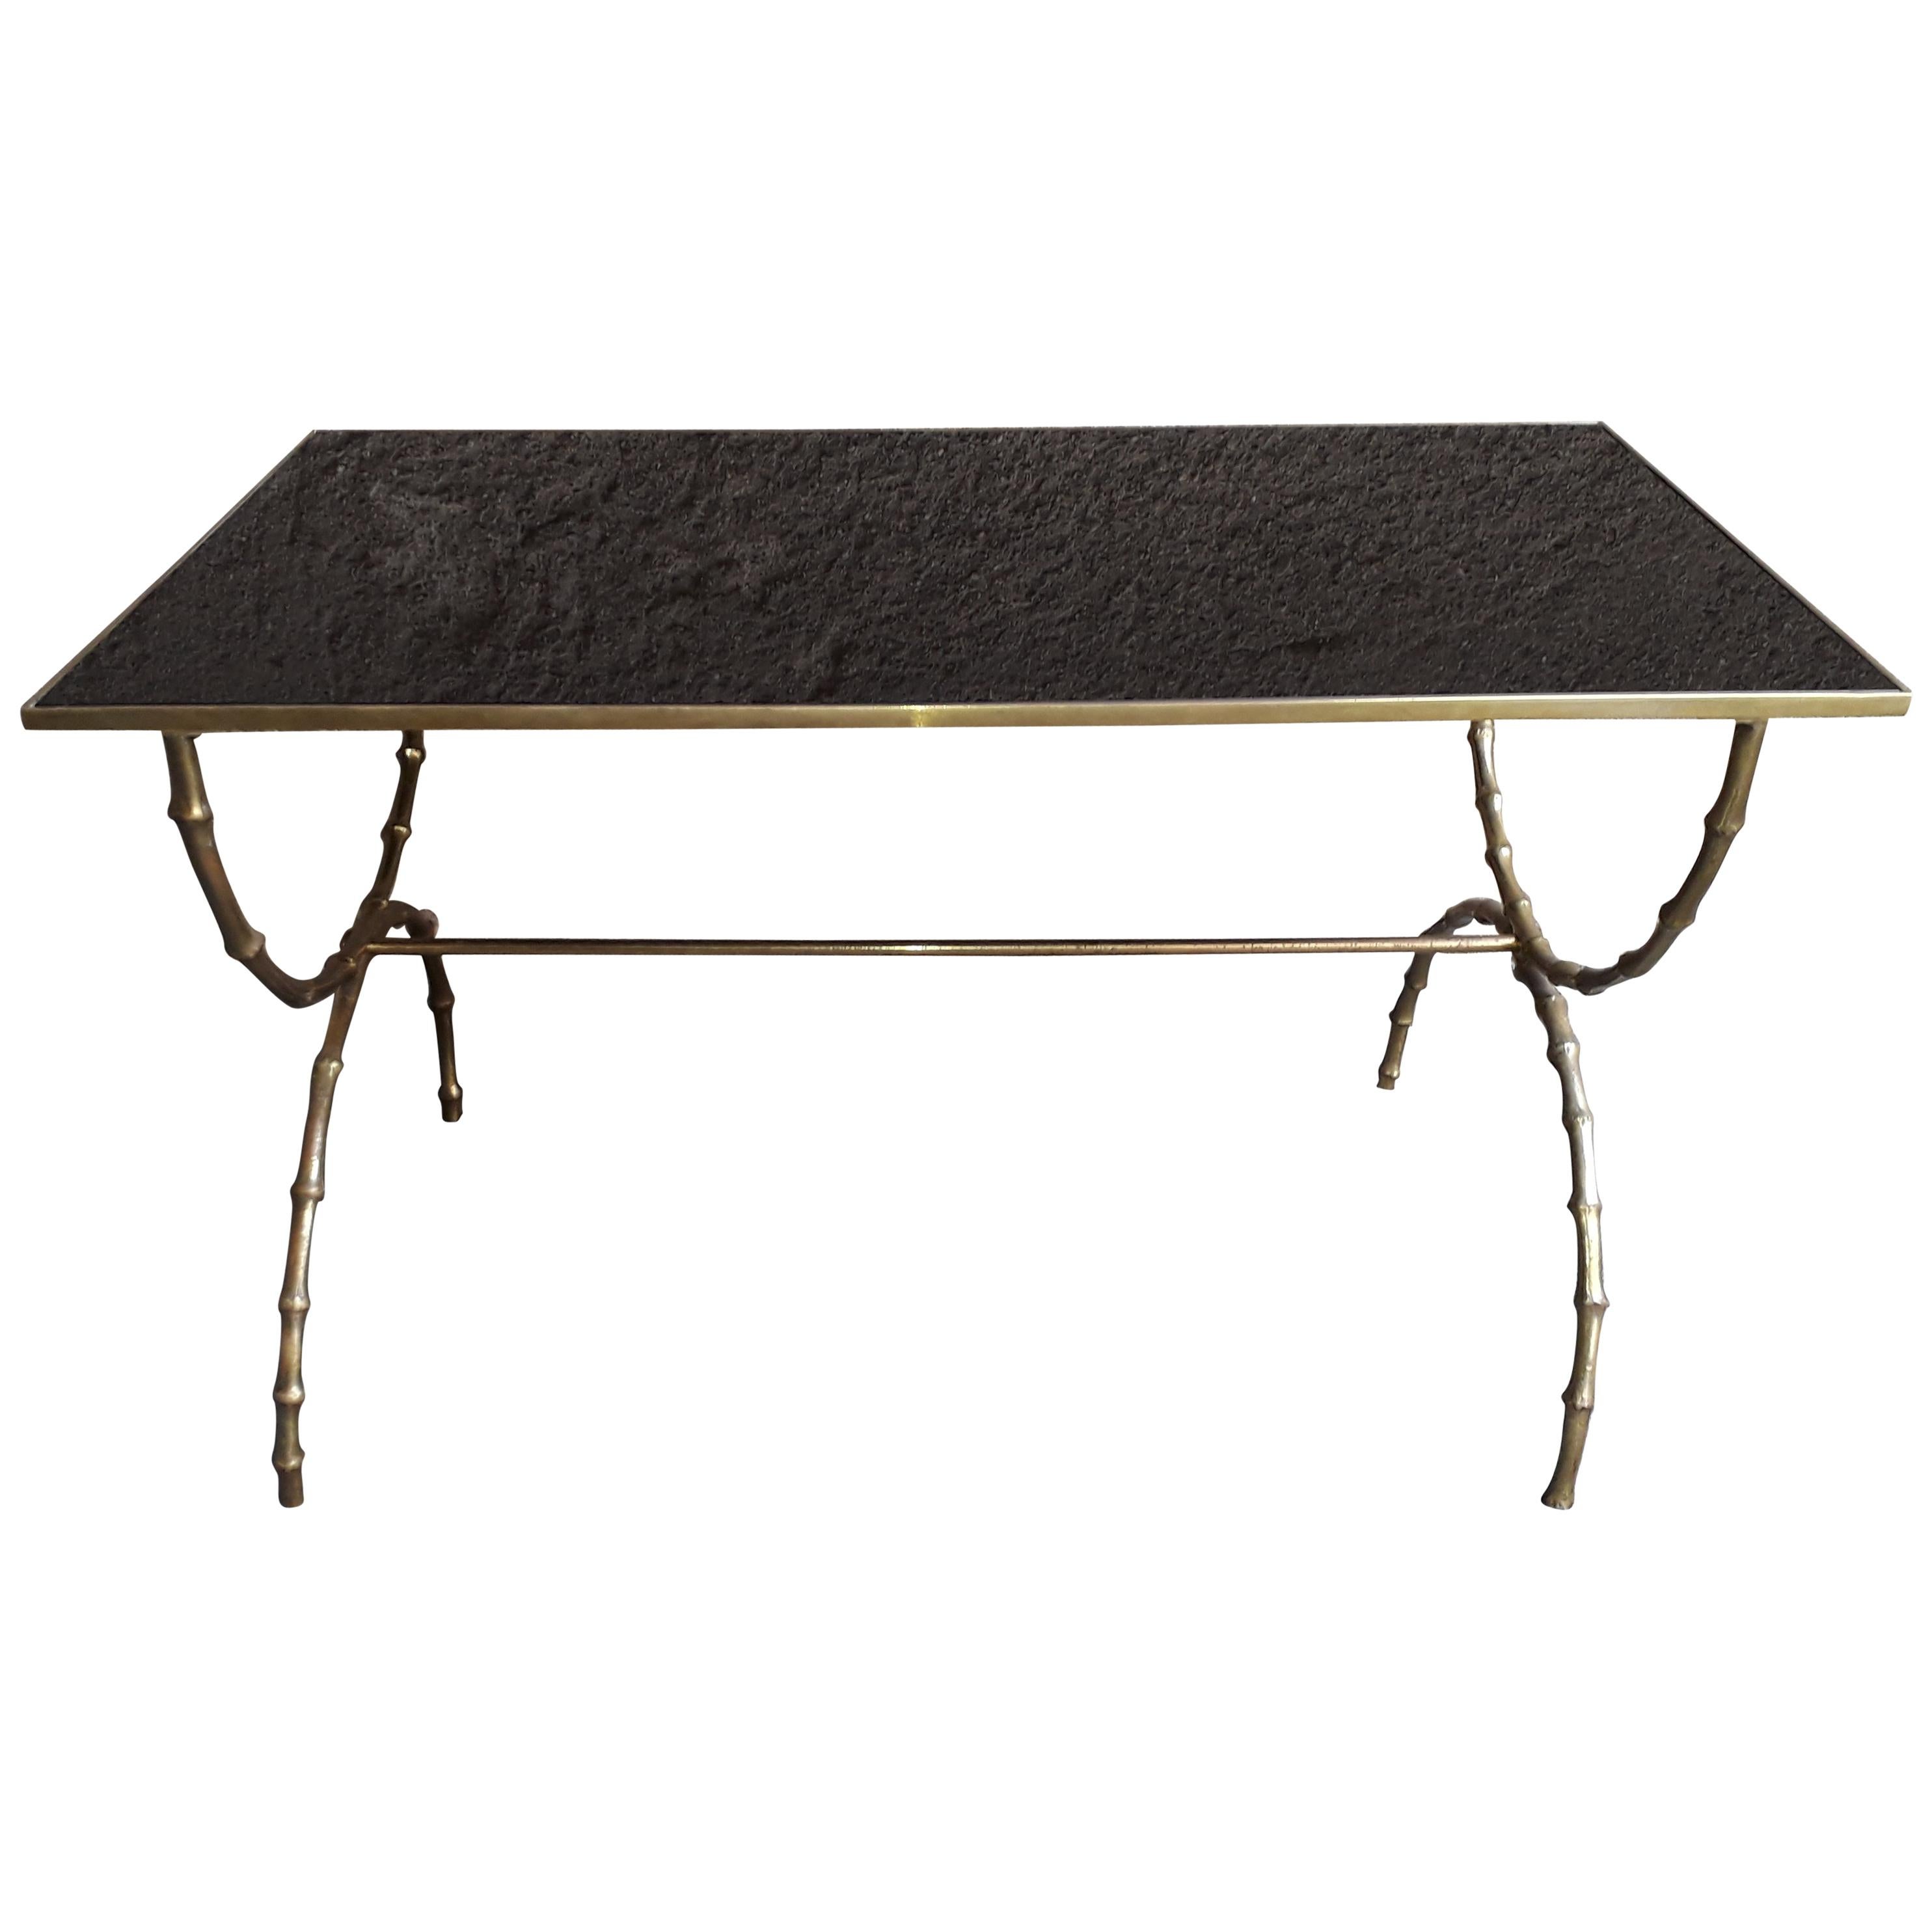 Mid-20th Century Bronze "Bamboo" Coffee Table by Maison Baguès For Sale